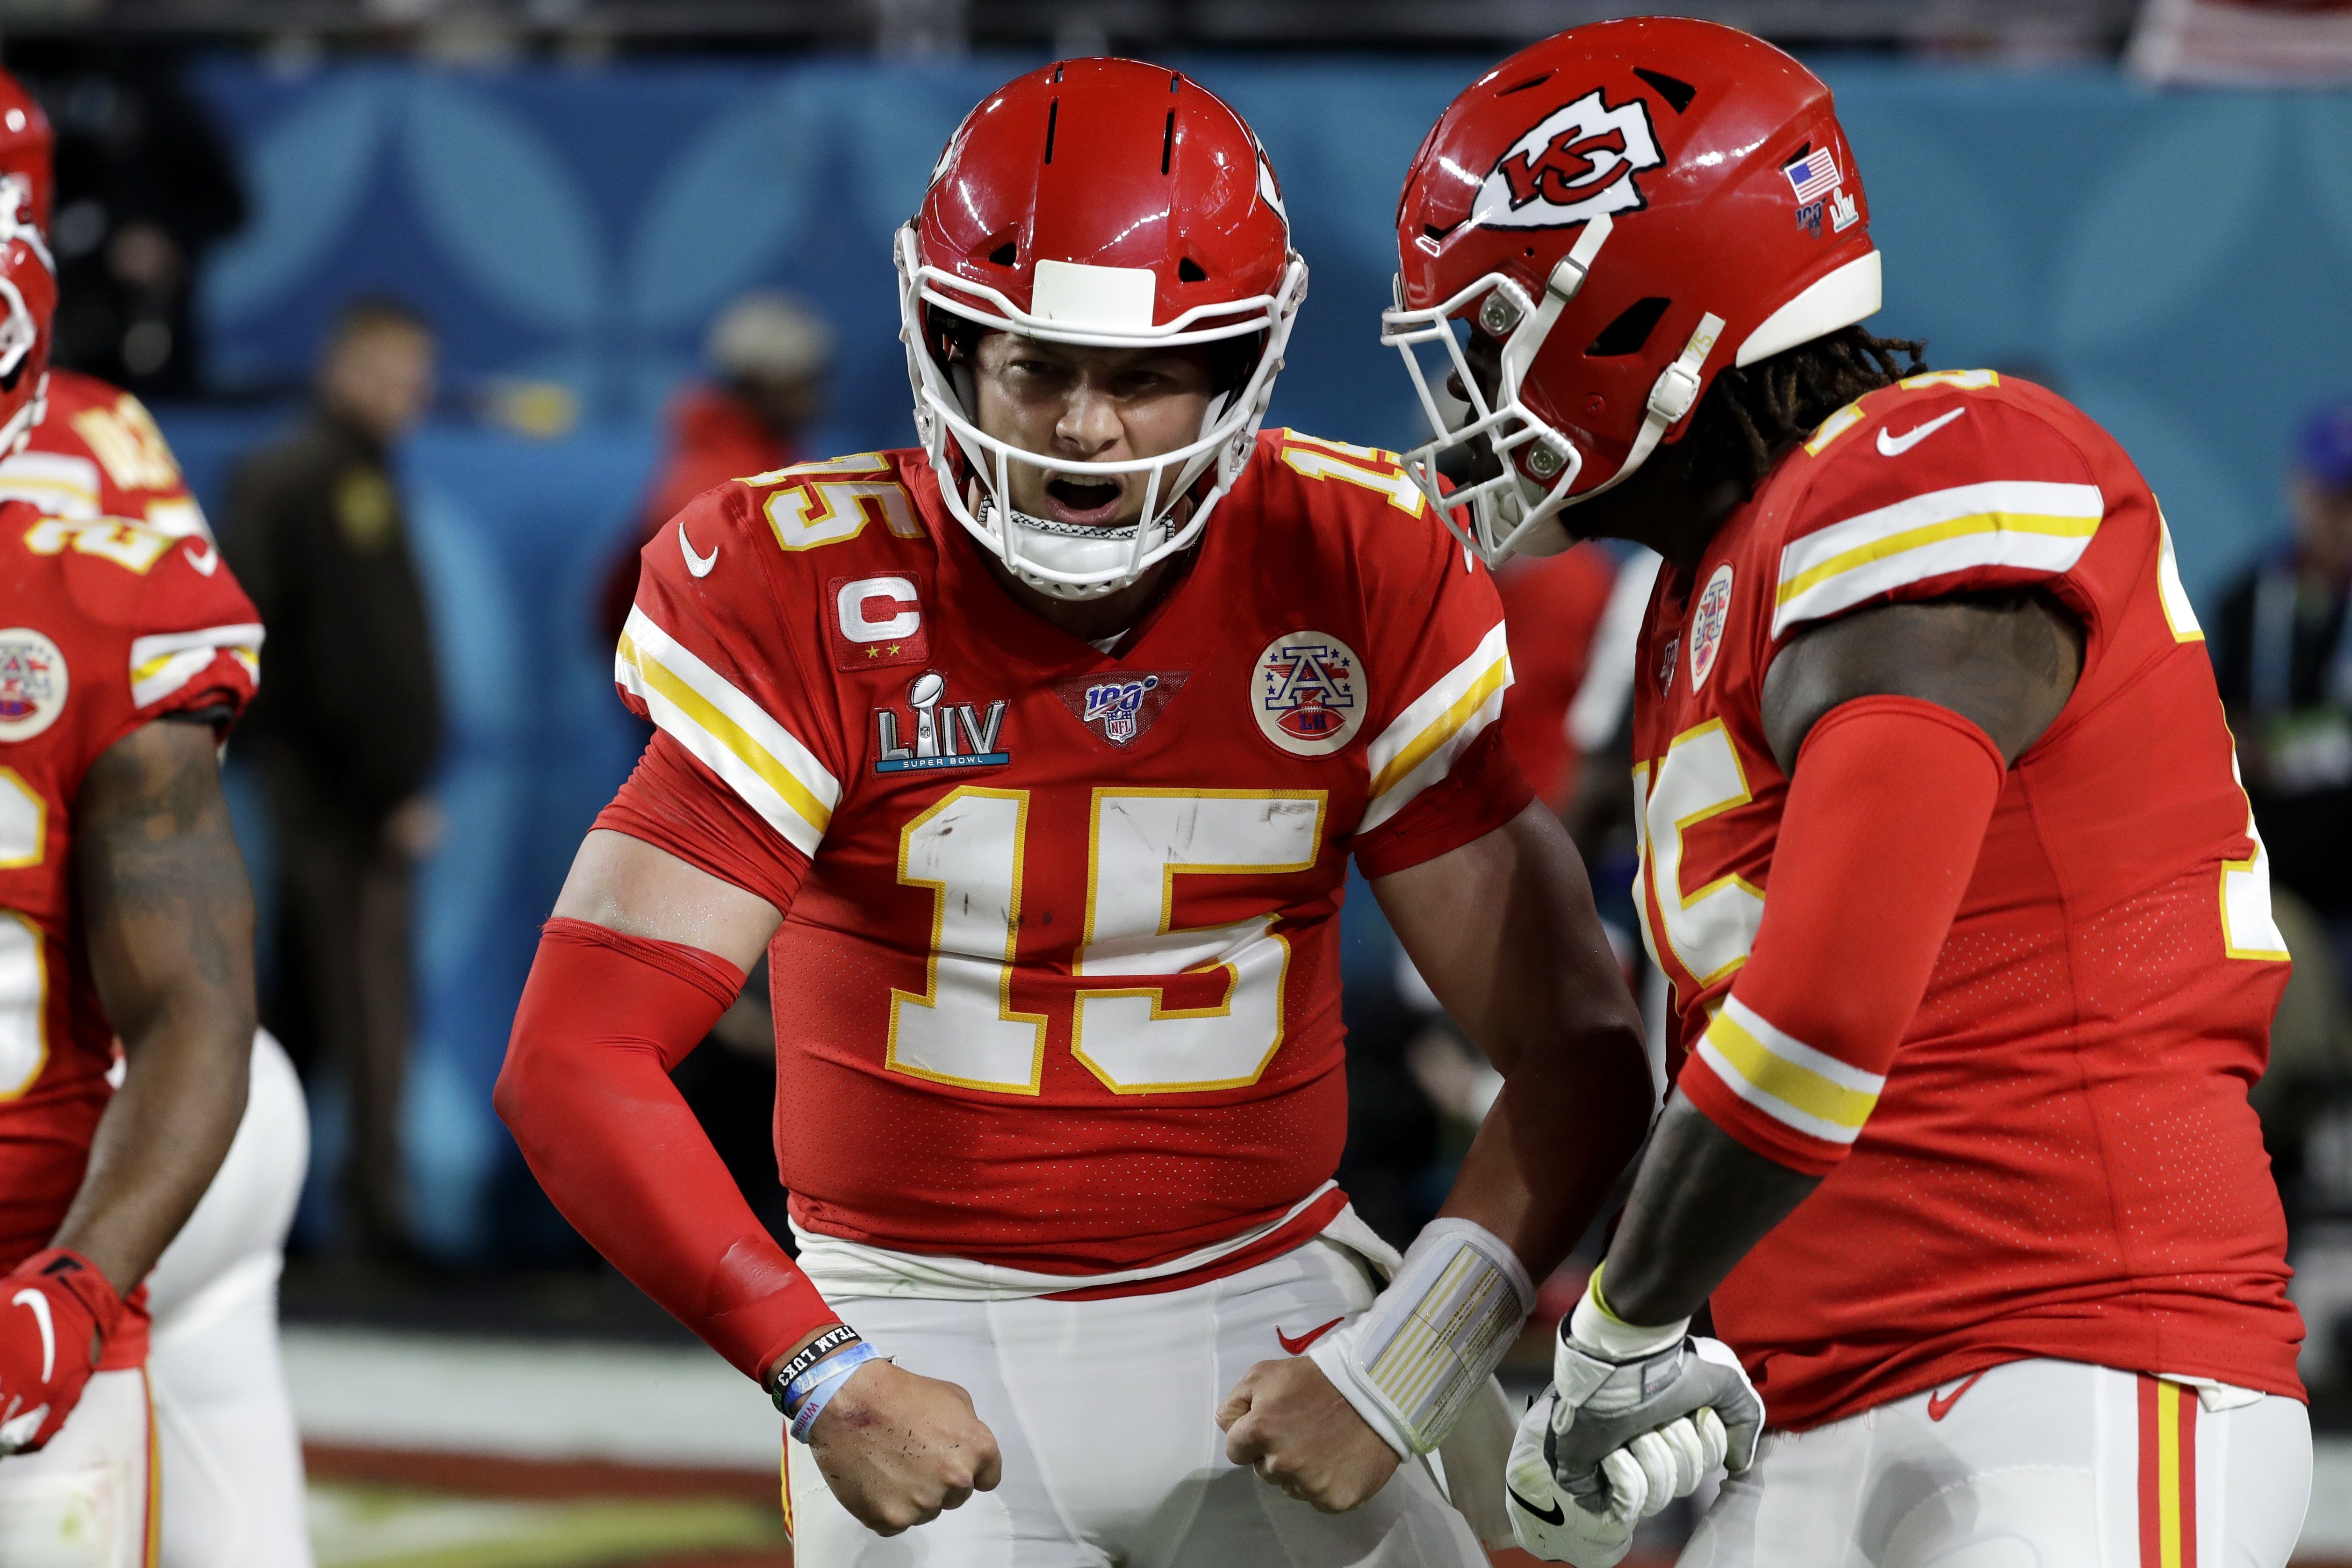 Chiefs win Super Bowl 54: 6 heroes in 31-20 win over 49ers  Damien  Williams, Patrick Mahomes and Andy Reid (finally) get it done 